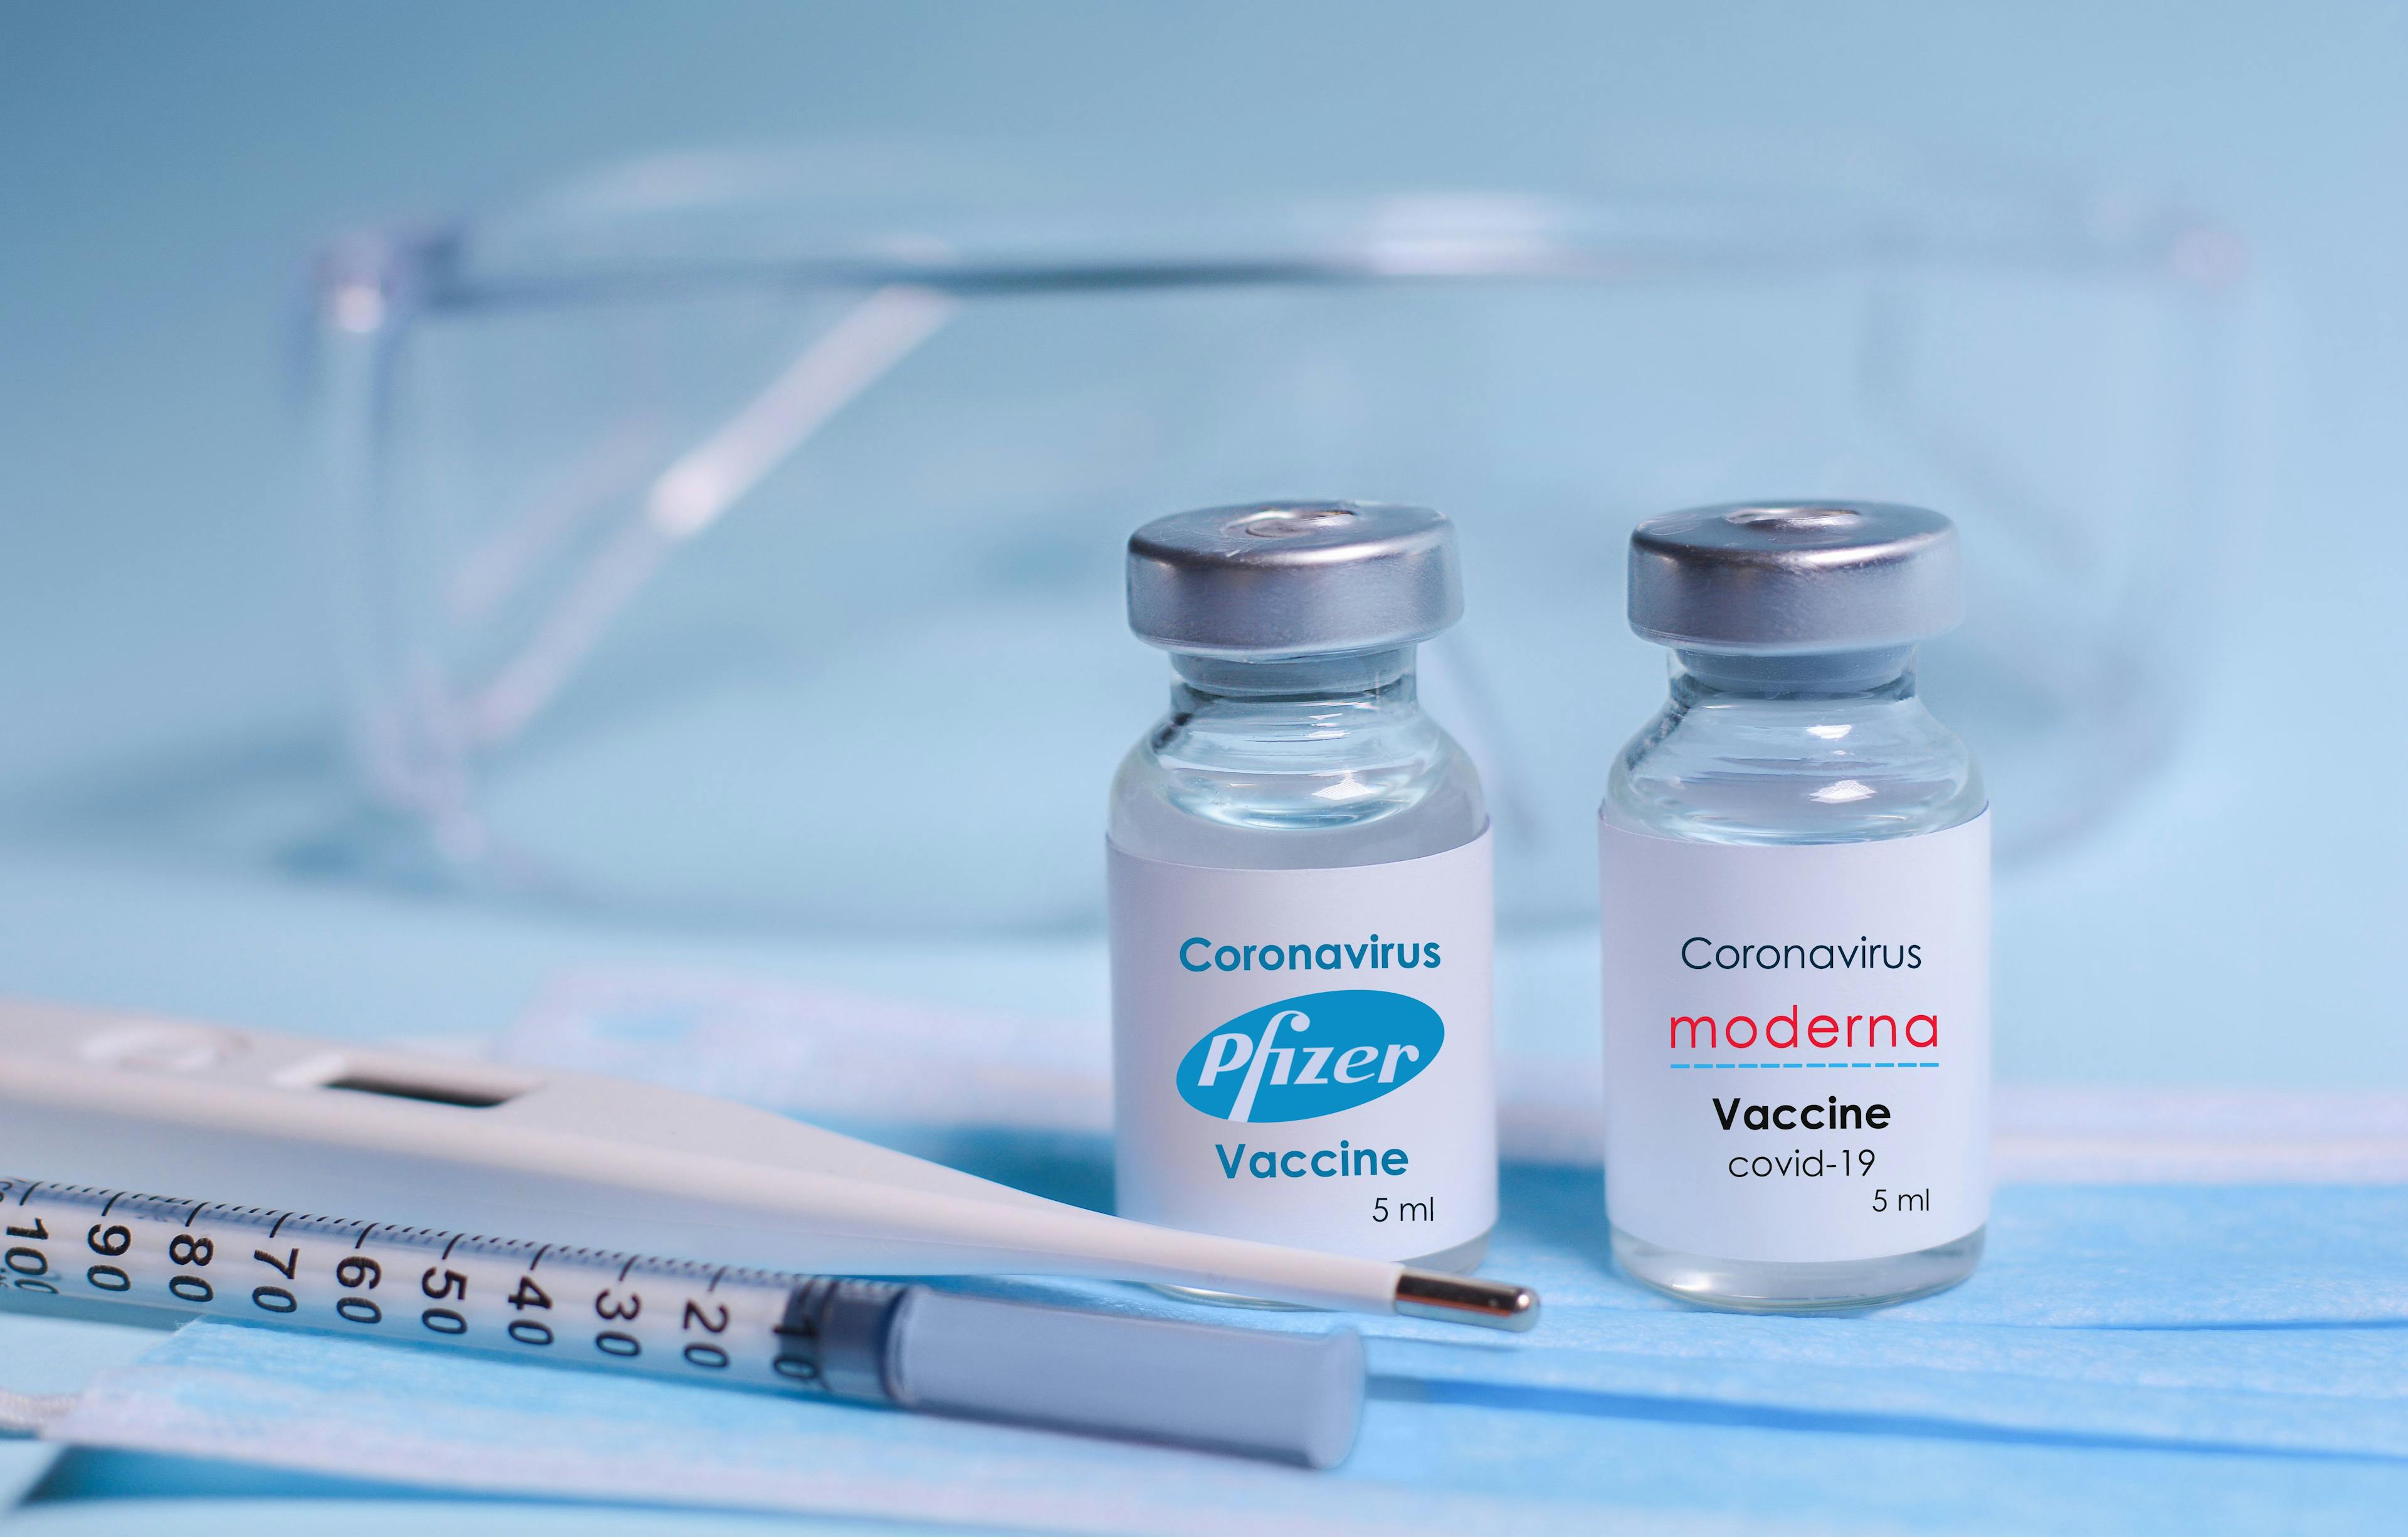 Large Study Confirms mRNA COVID-19 Vaccine Side Effects are Mild and Temporary